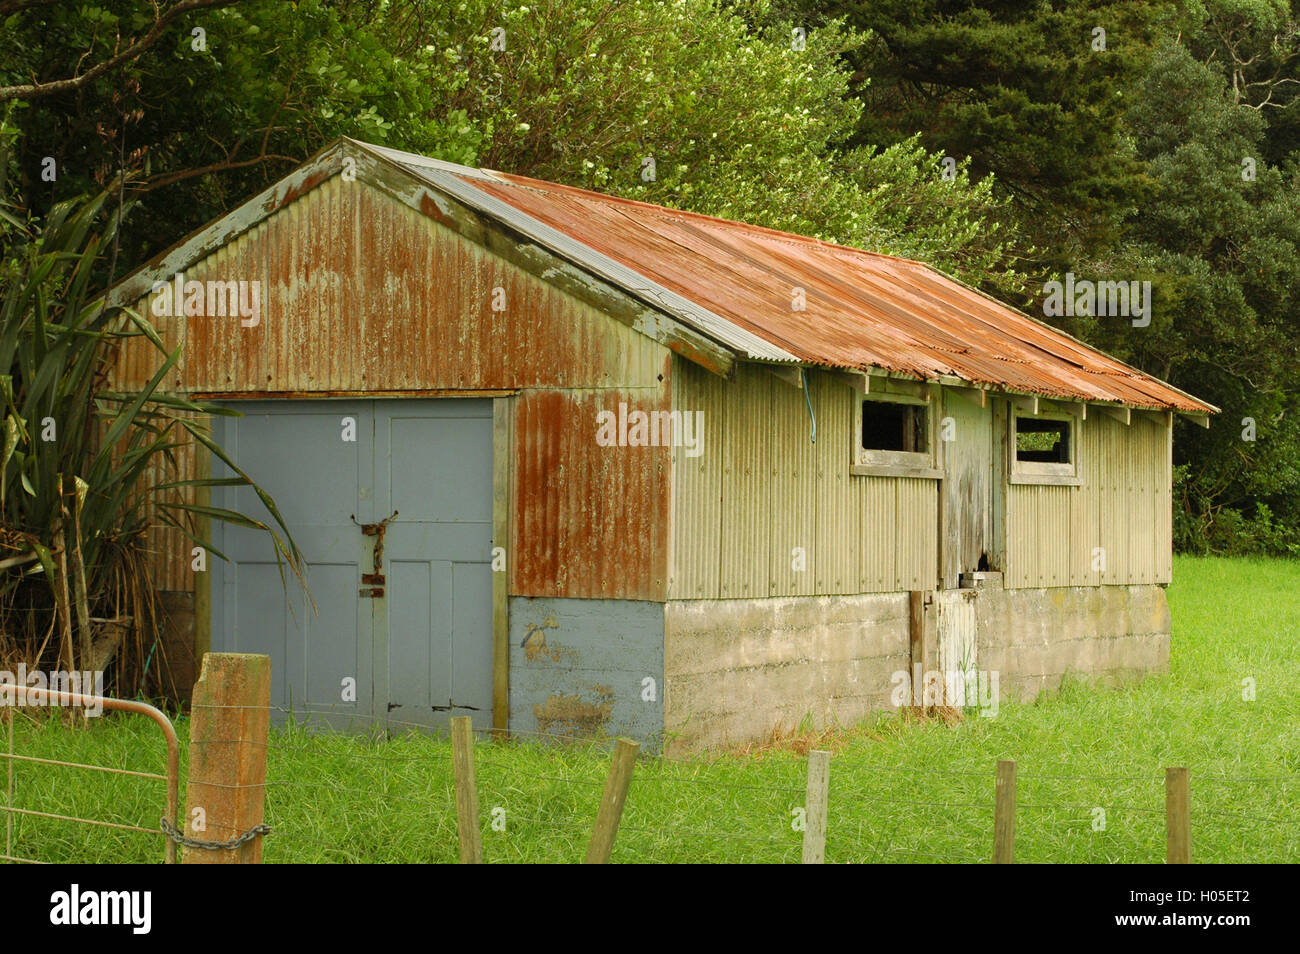 Shed made of rusty corrugated sheet metal on concrete base Stock Photo